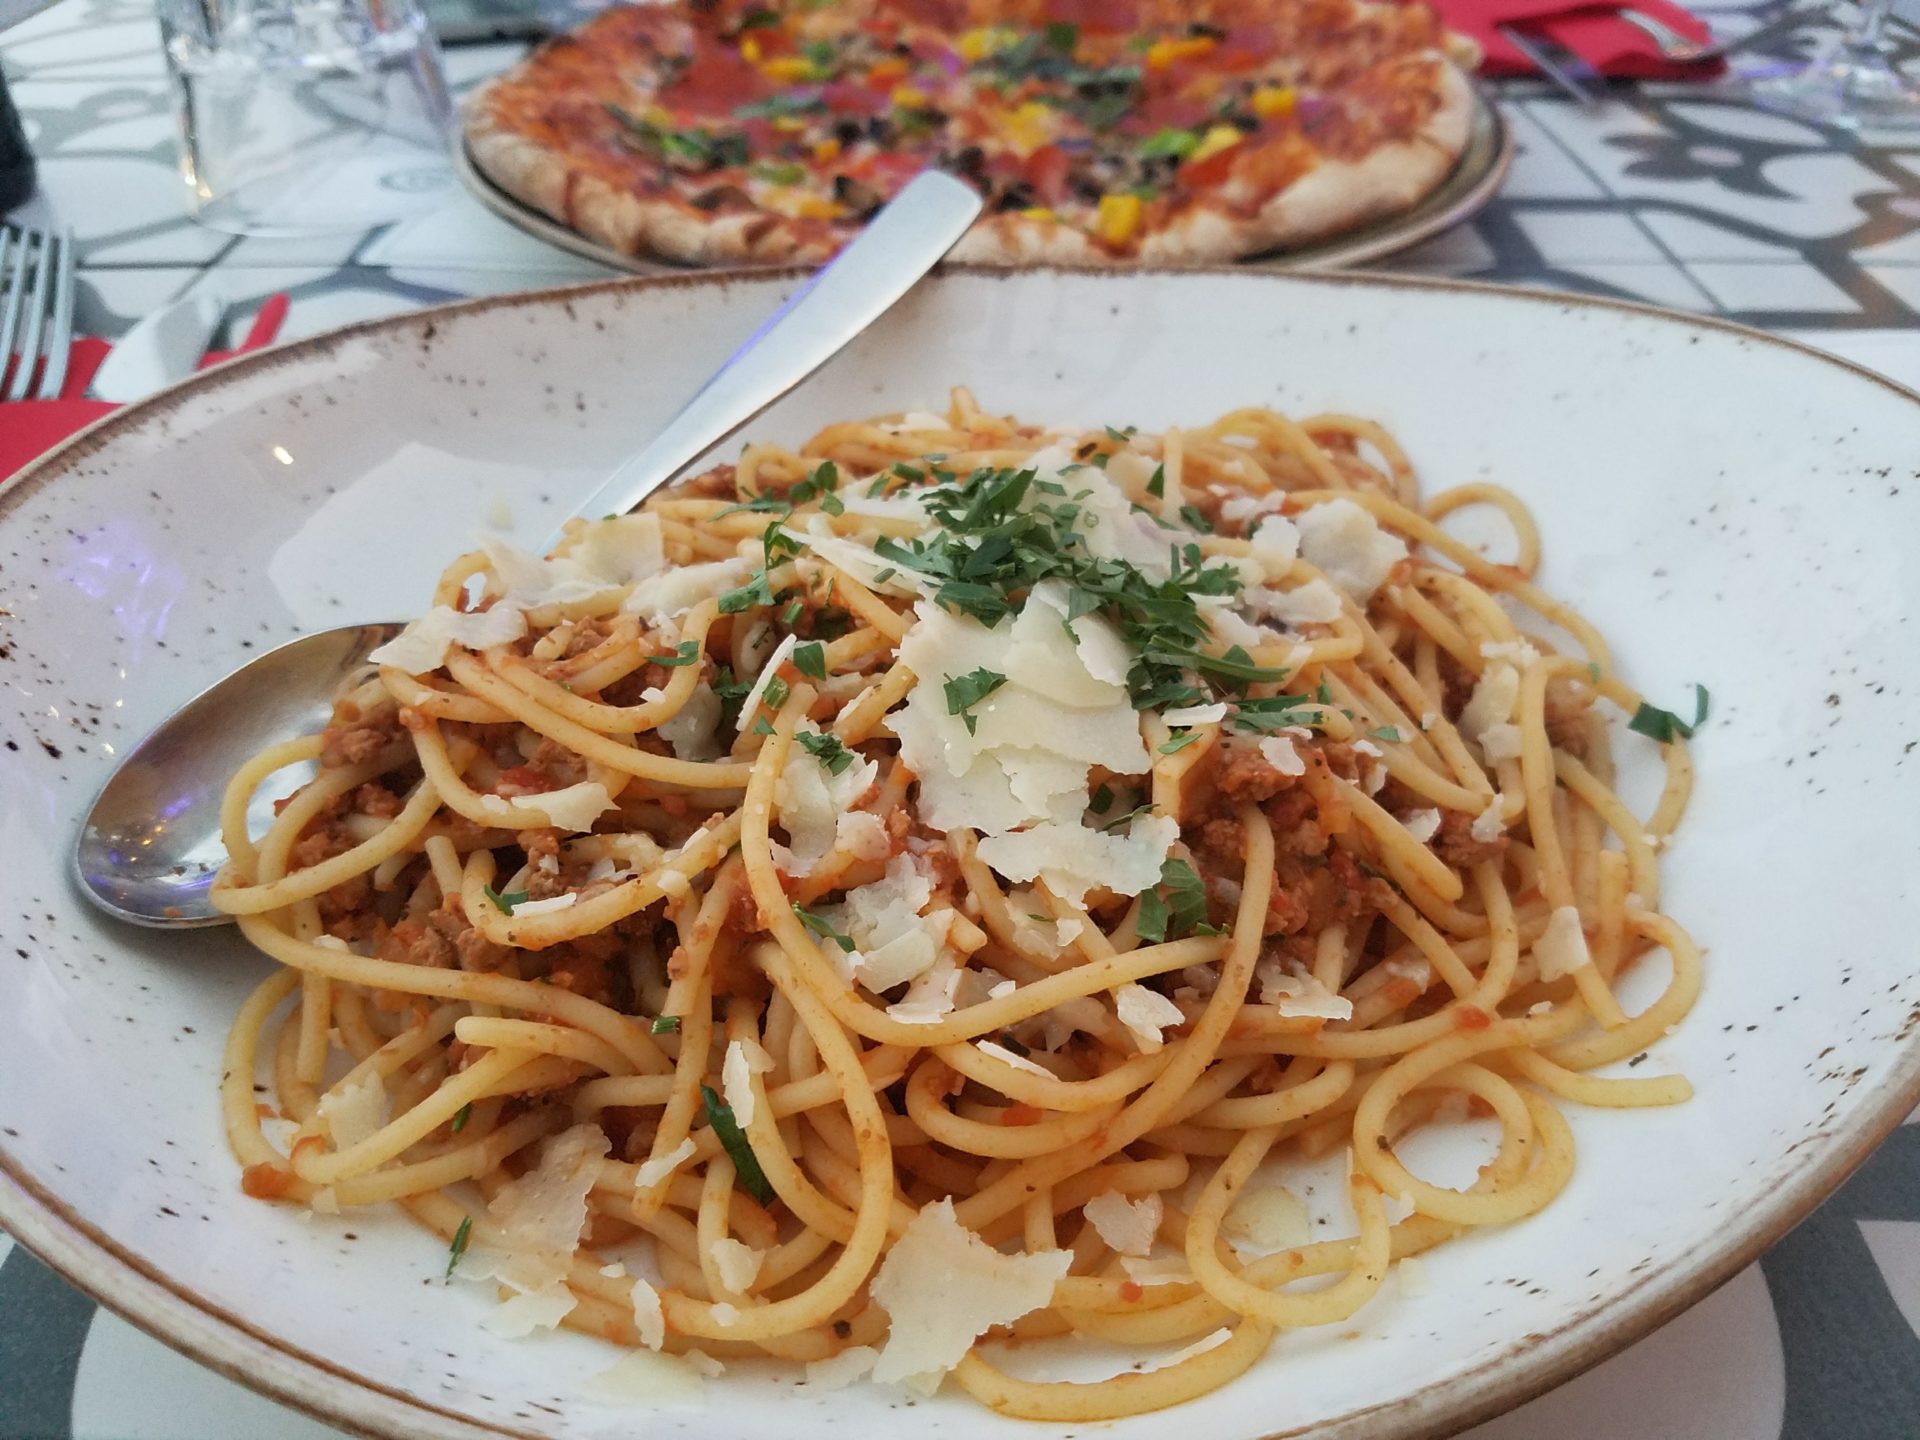 a plate of spaghetti and pizza